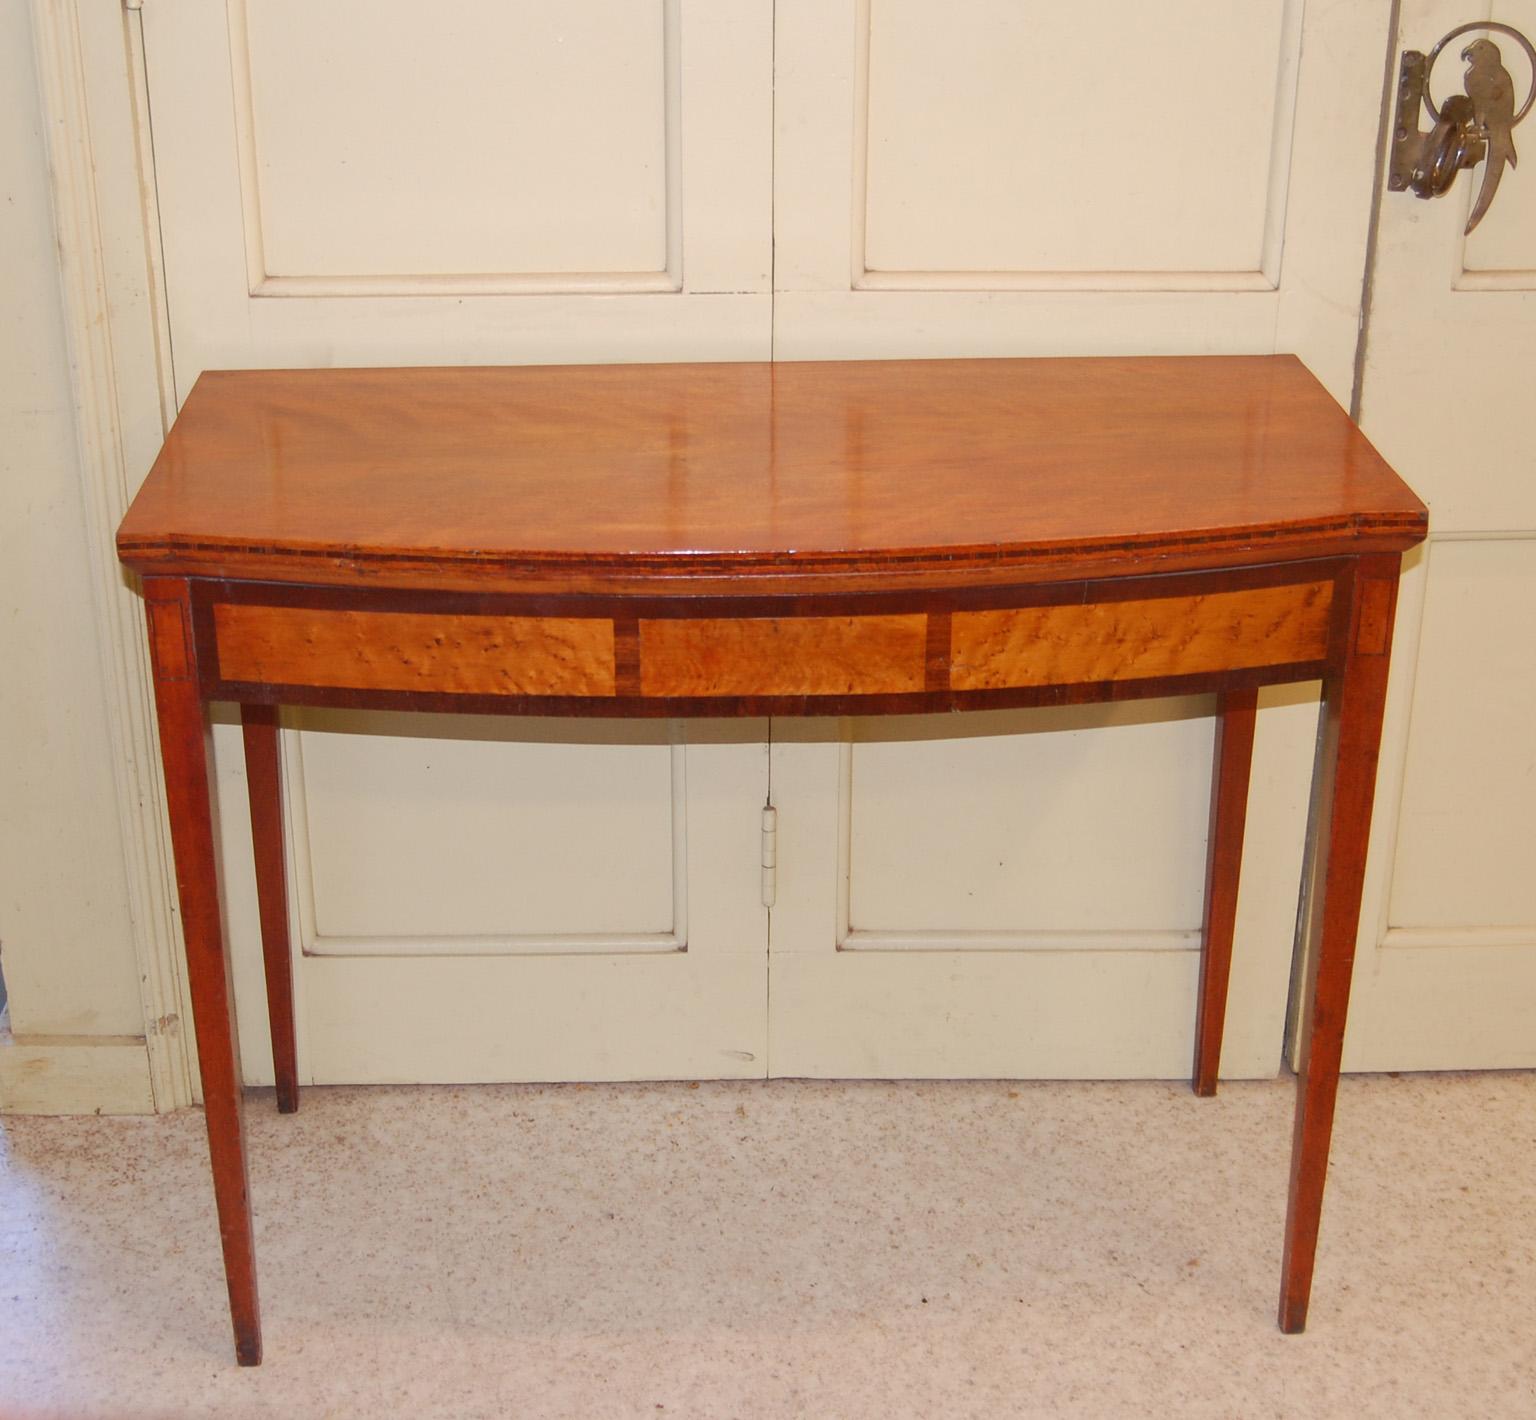  American Federal 18th Century Portsmouth, New Hampshire tea table with elegant tapered legs and breakfront bowfront folding top.  This foldover Hepplewhite tea table opens up supported by one swing leg  to seat four people for tea or games. The